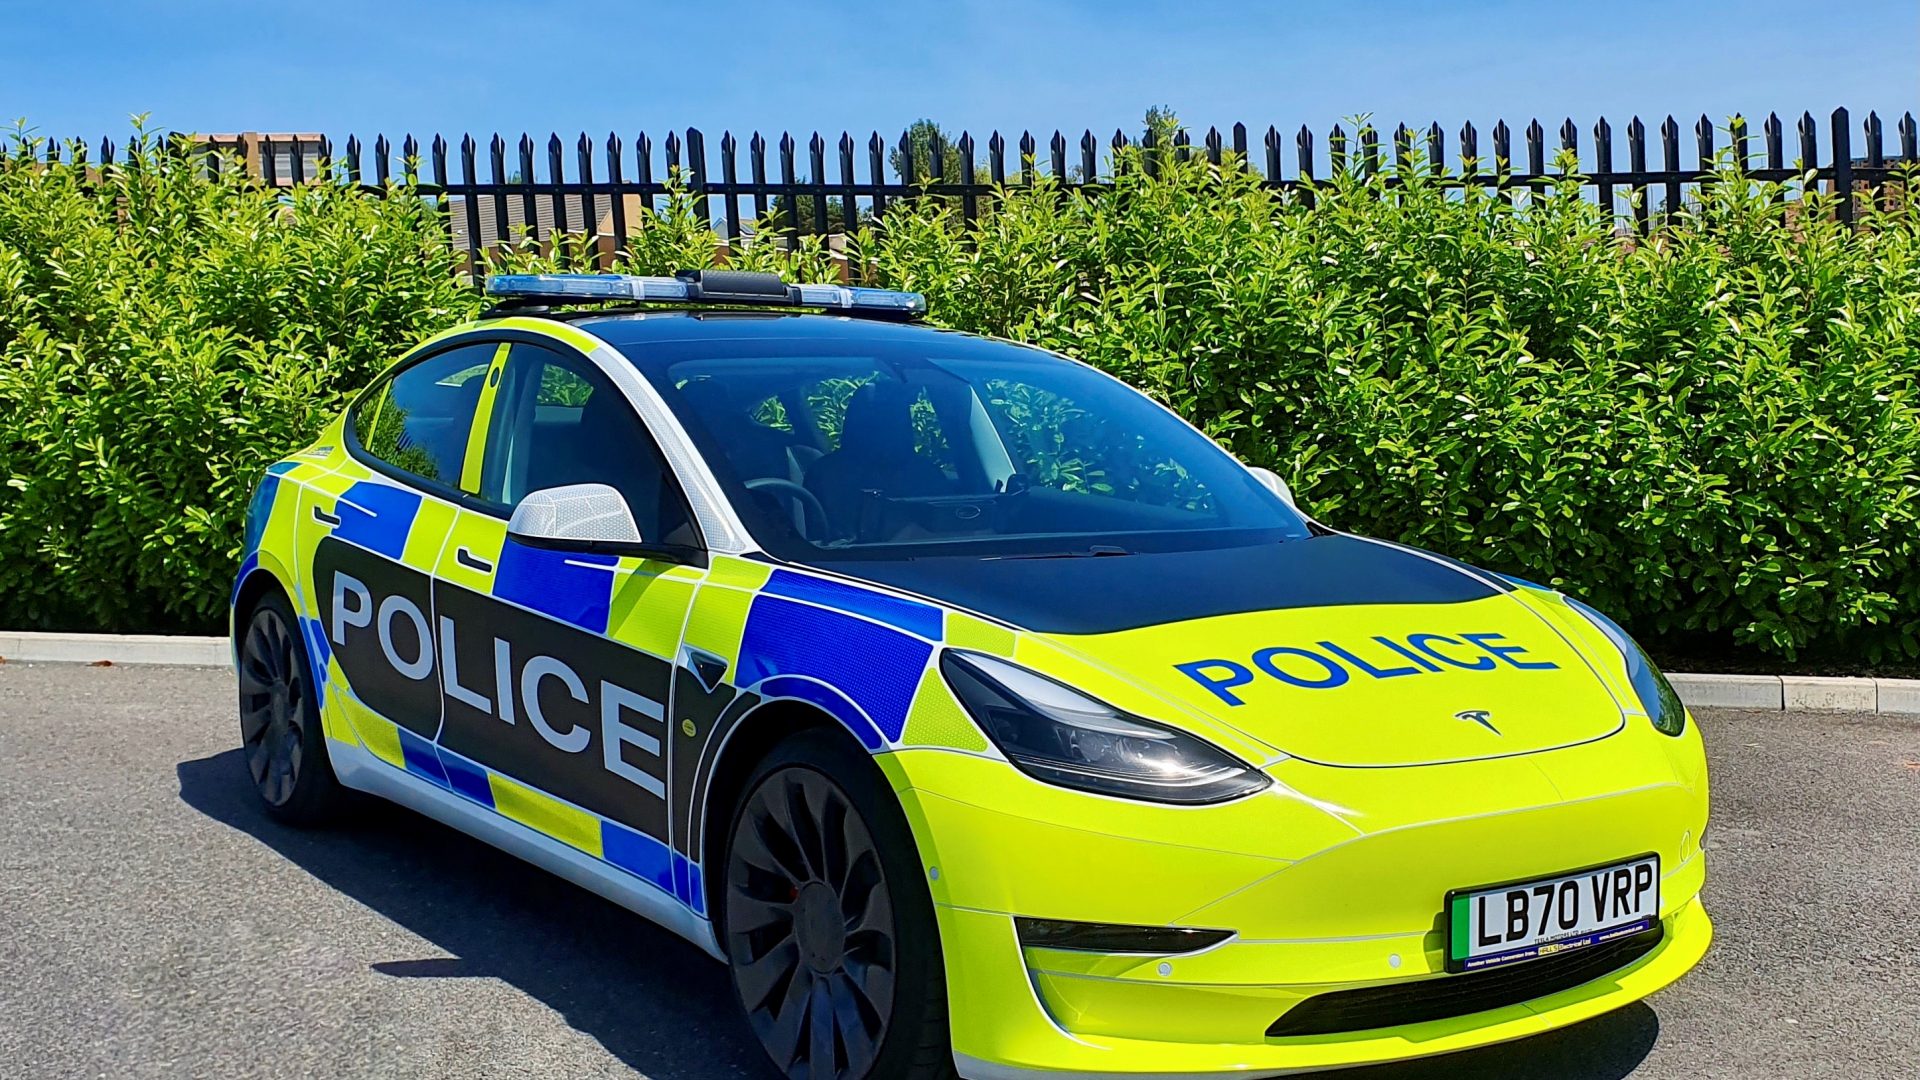 Tesla Model 3 police cars are ready for testing by UK forces – Car